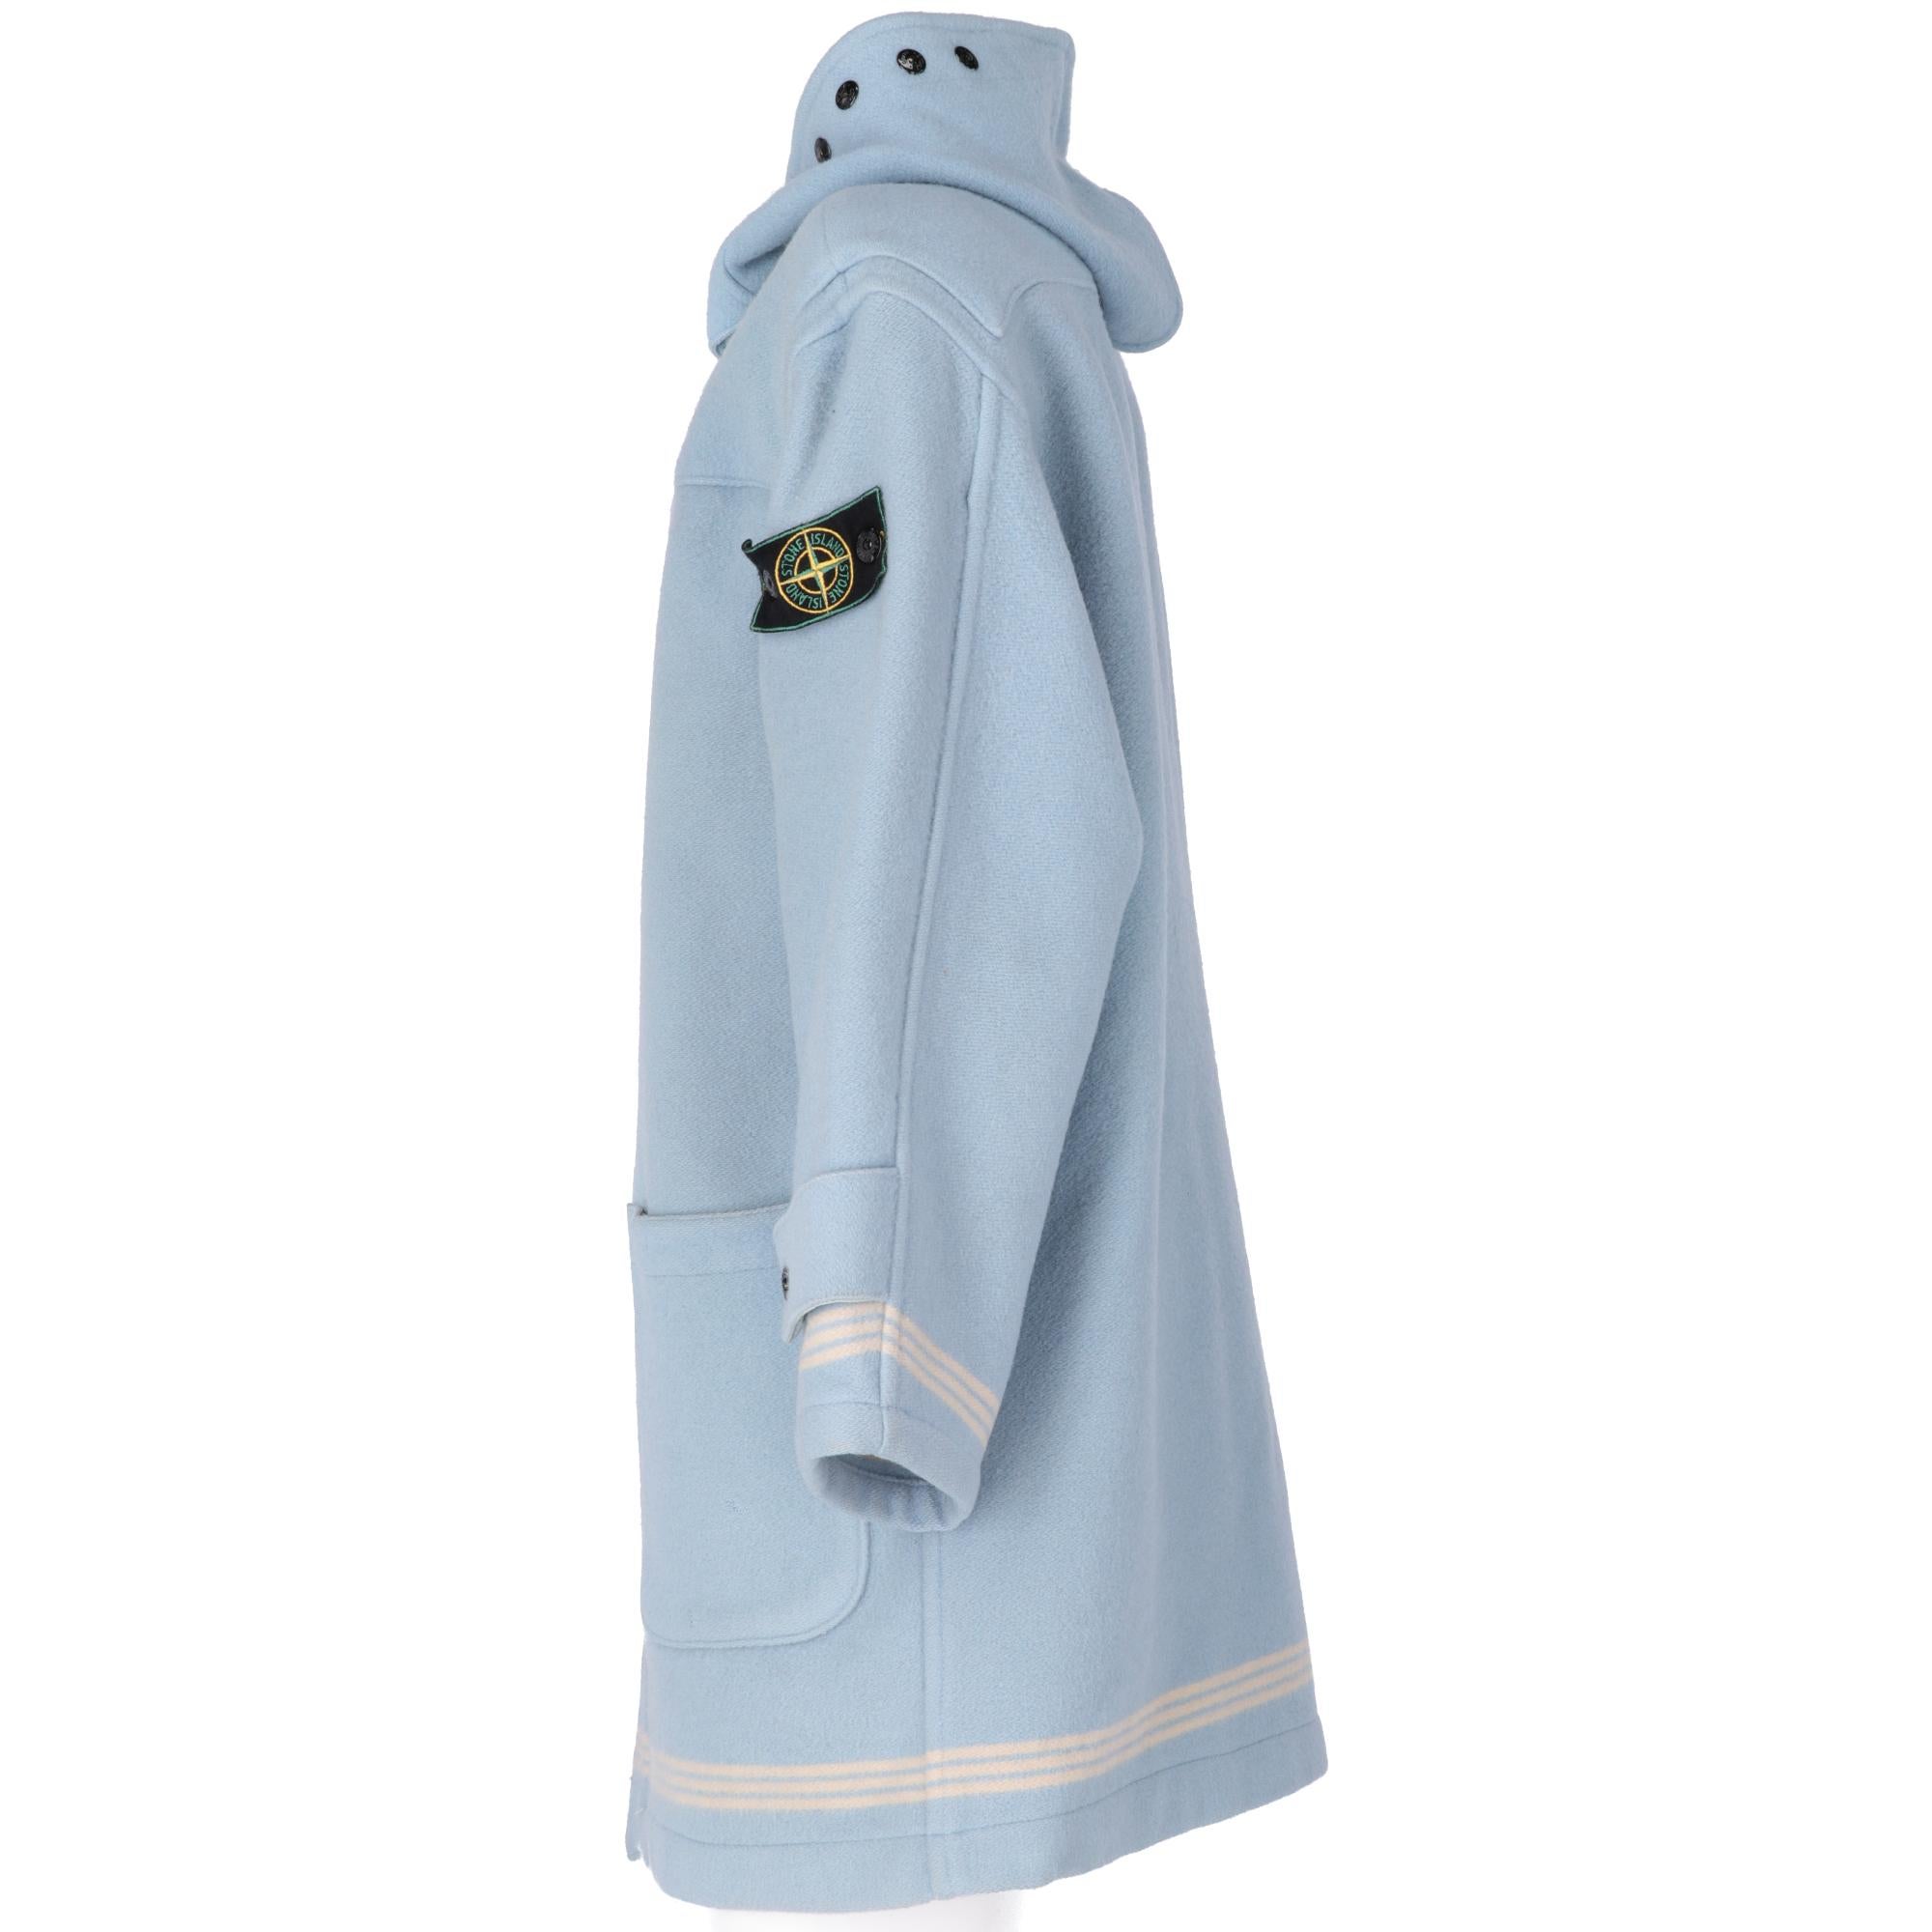 Stone Island light blue wool montgomery coat, with wooden frogs on the front,  hood decorated with press-studded buttons and cuffs with strap and button, a chinstrap and two front applied pockets, classic brand label on the left sleeve and three